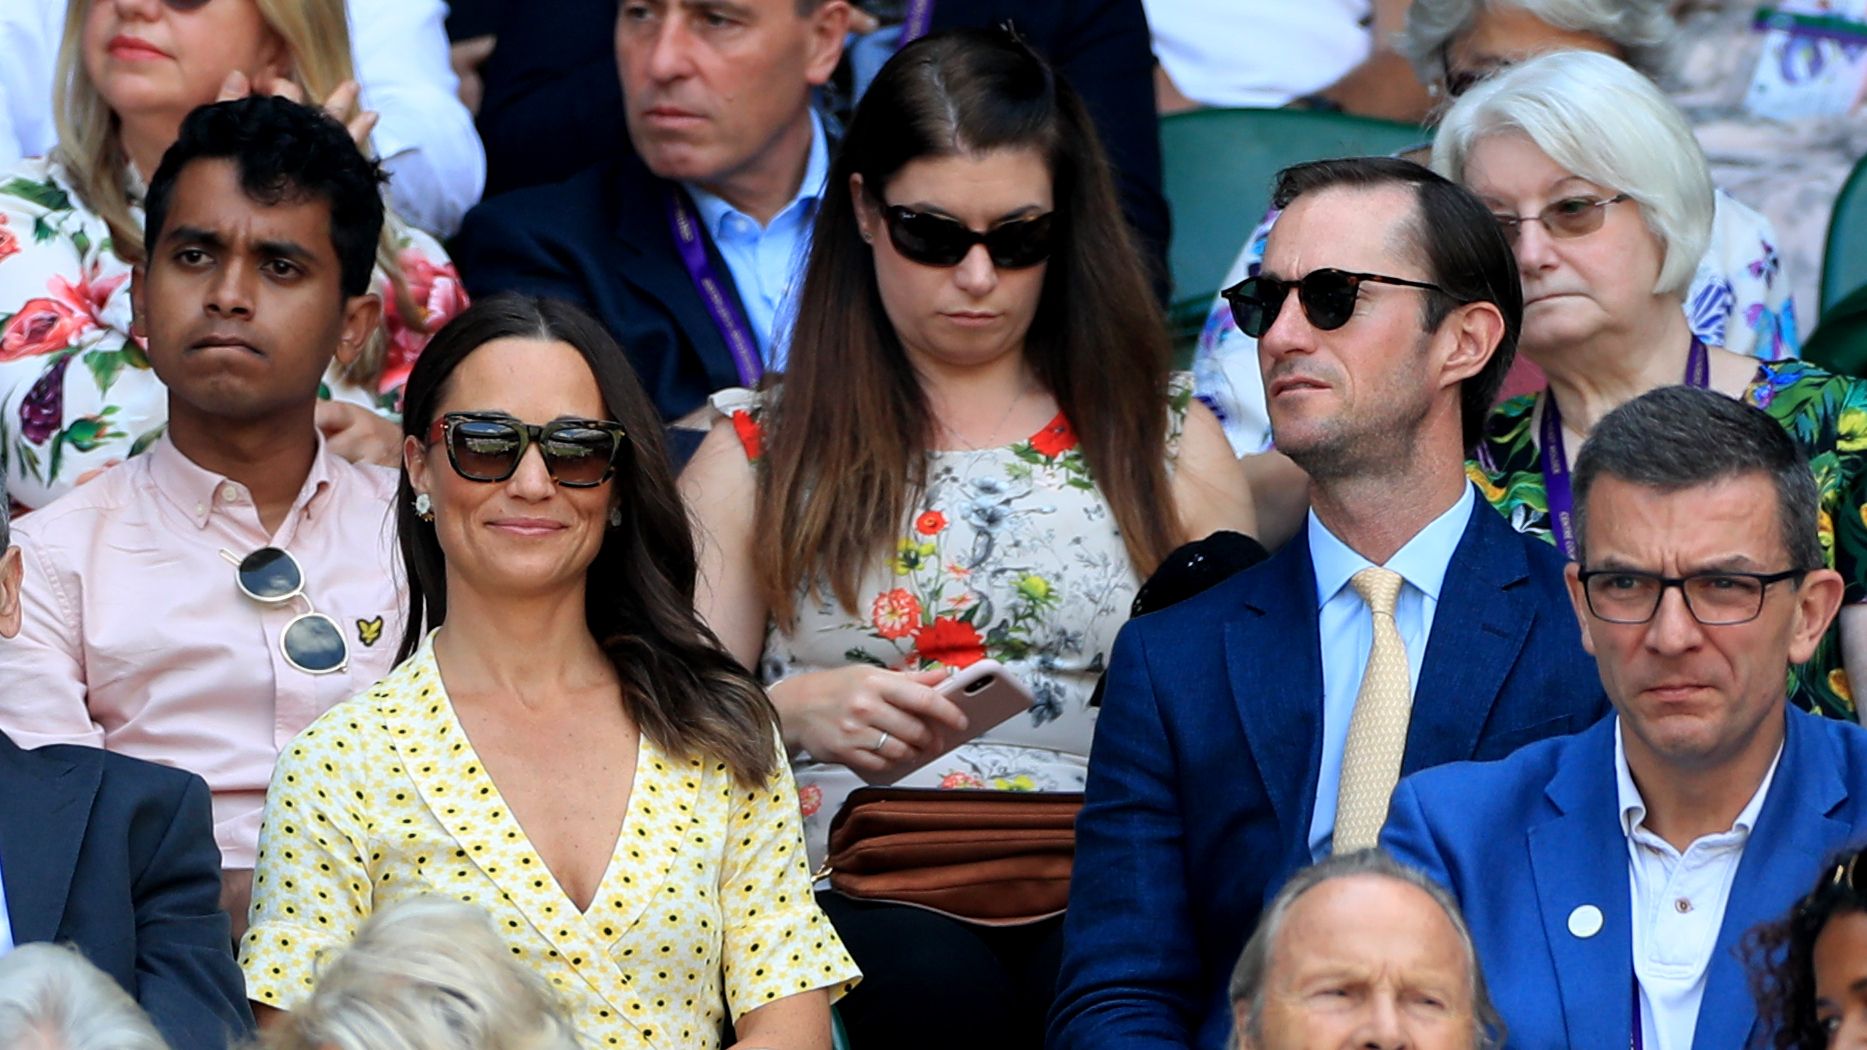 Kate Middleton turns heads in chic navy and white polka dot dress at  Wimbledon Men's final